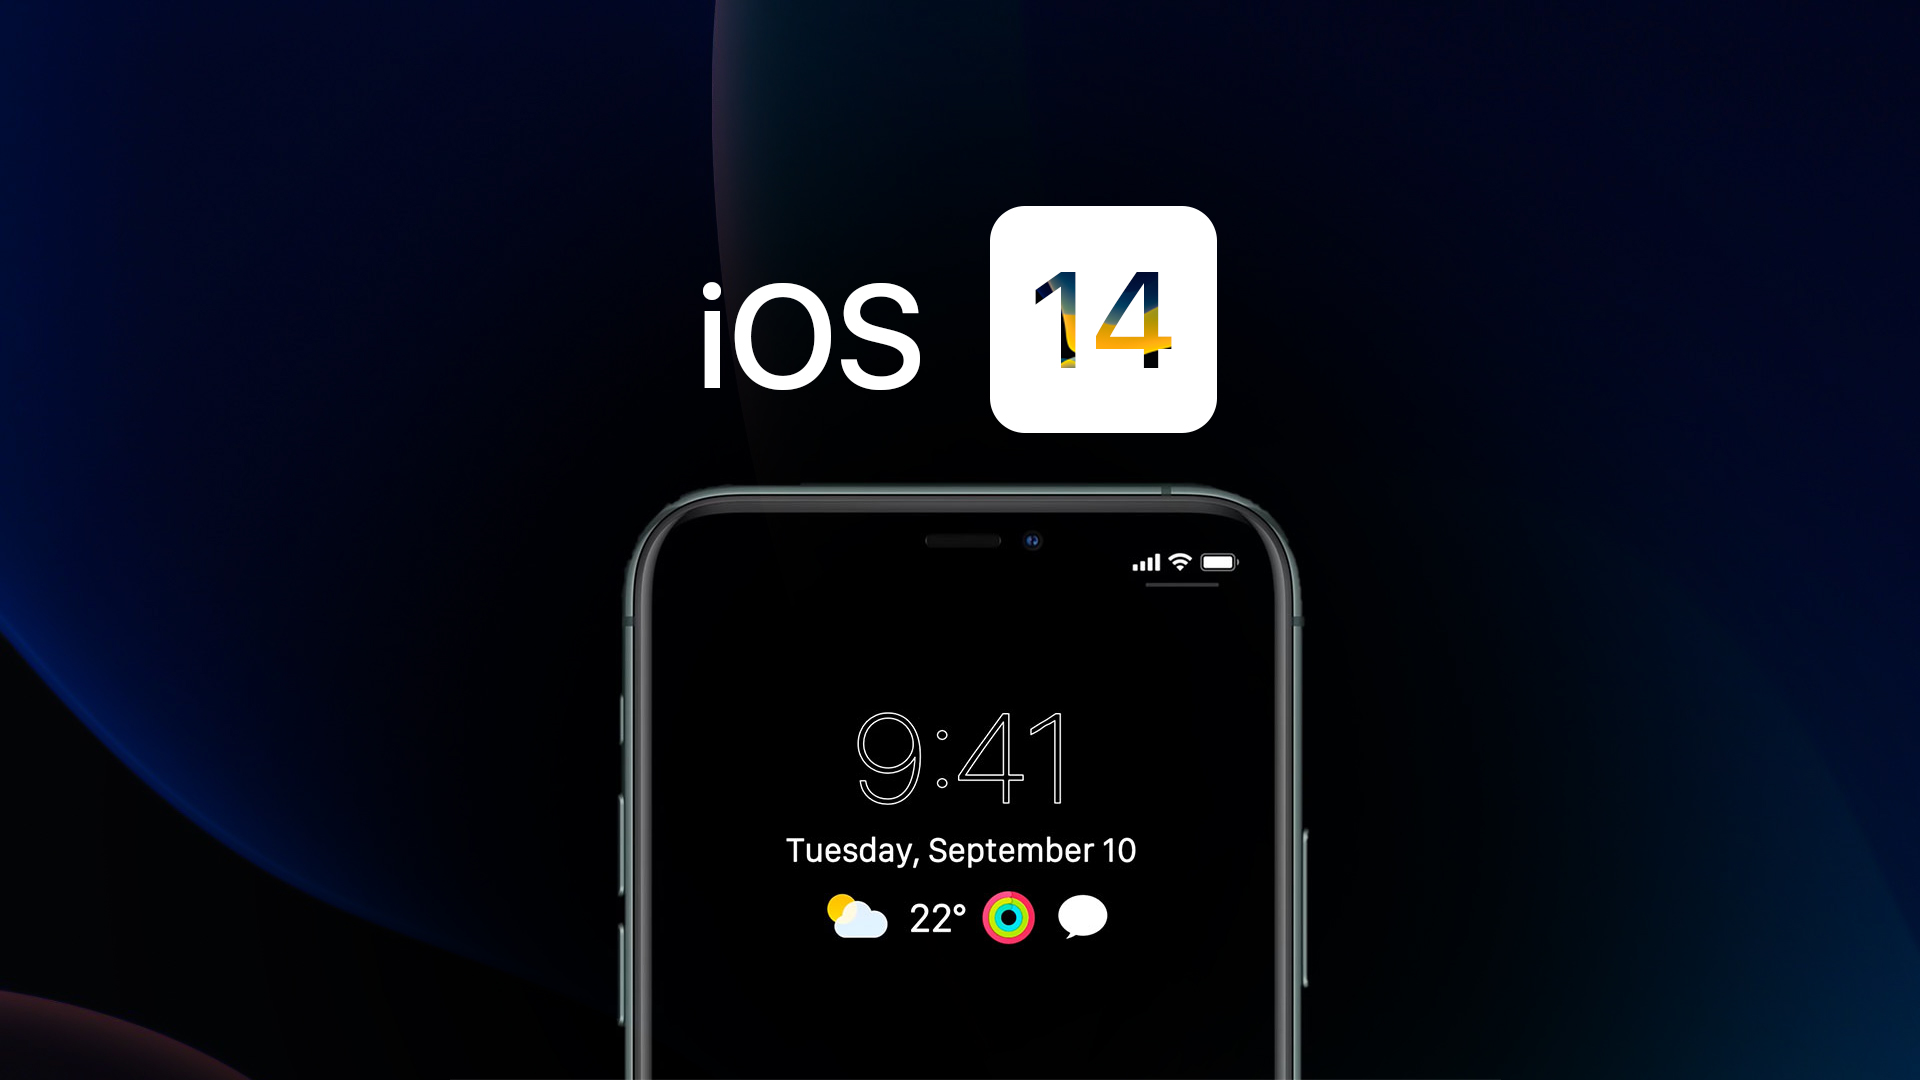 iOS 14 Release Date and Features